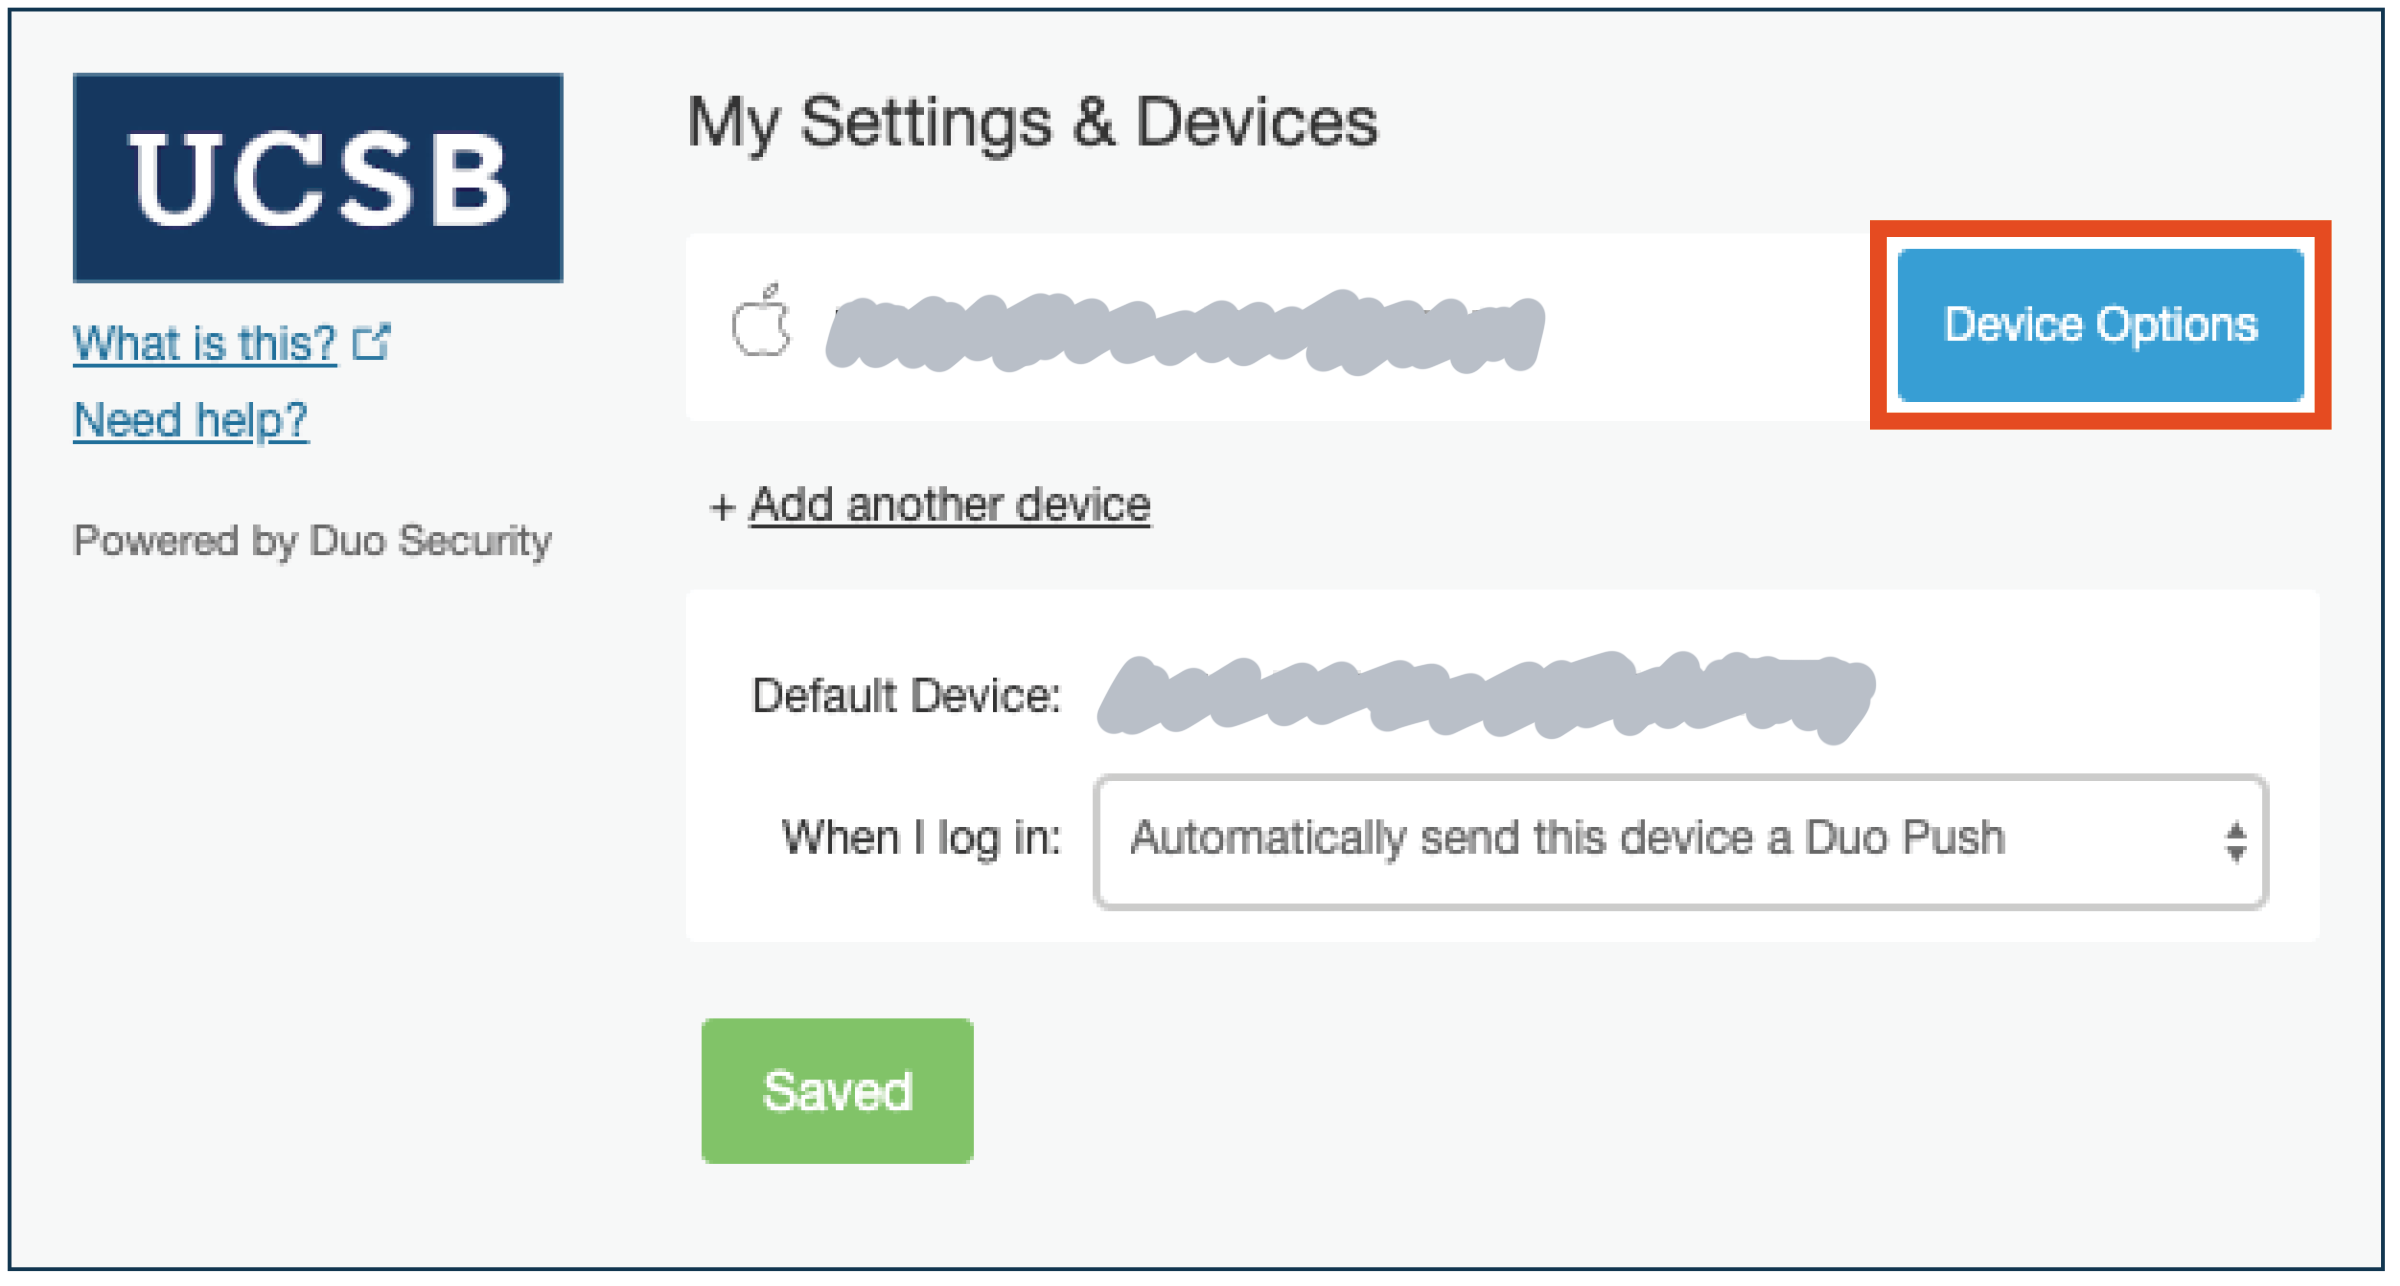 Duo device options